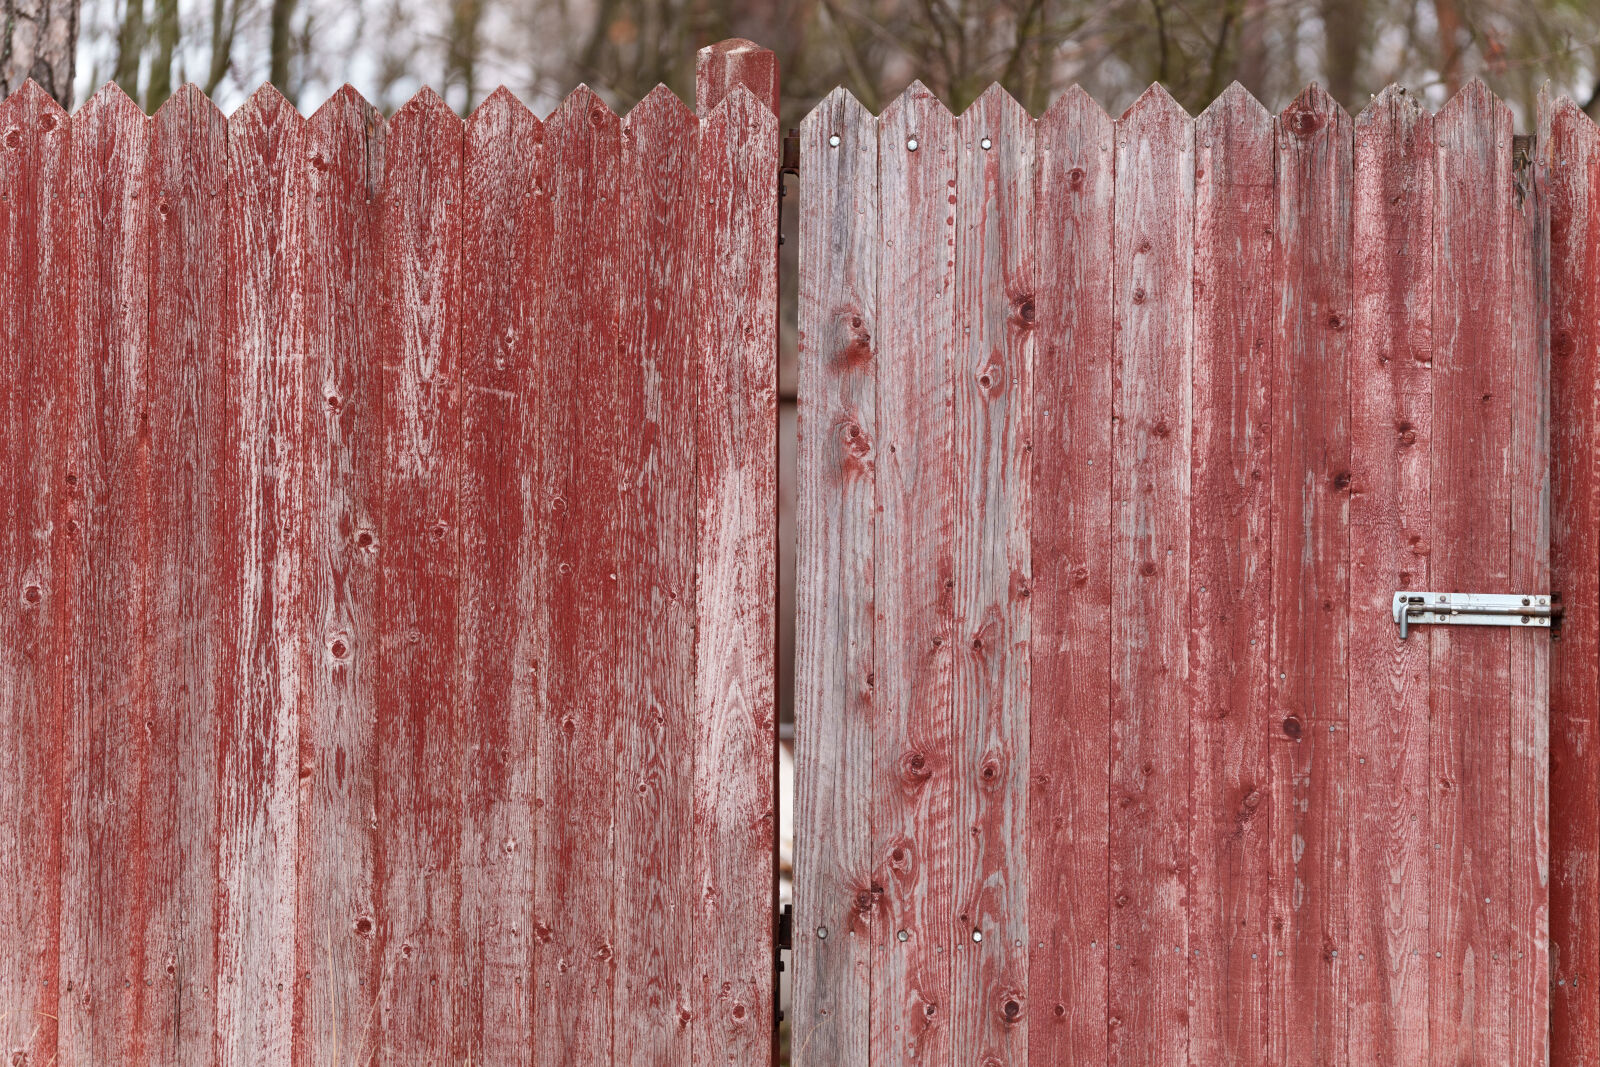 Sigma 70-200mm F2.8 DG DN OS | Sports sample photo. Old fence photography